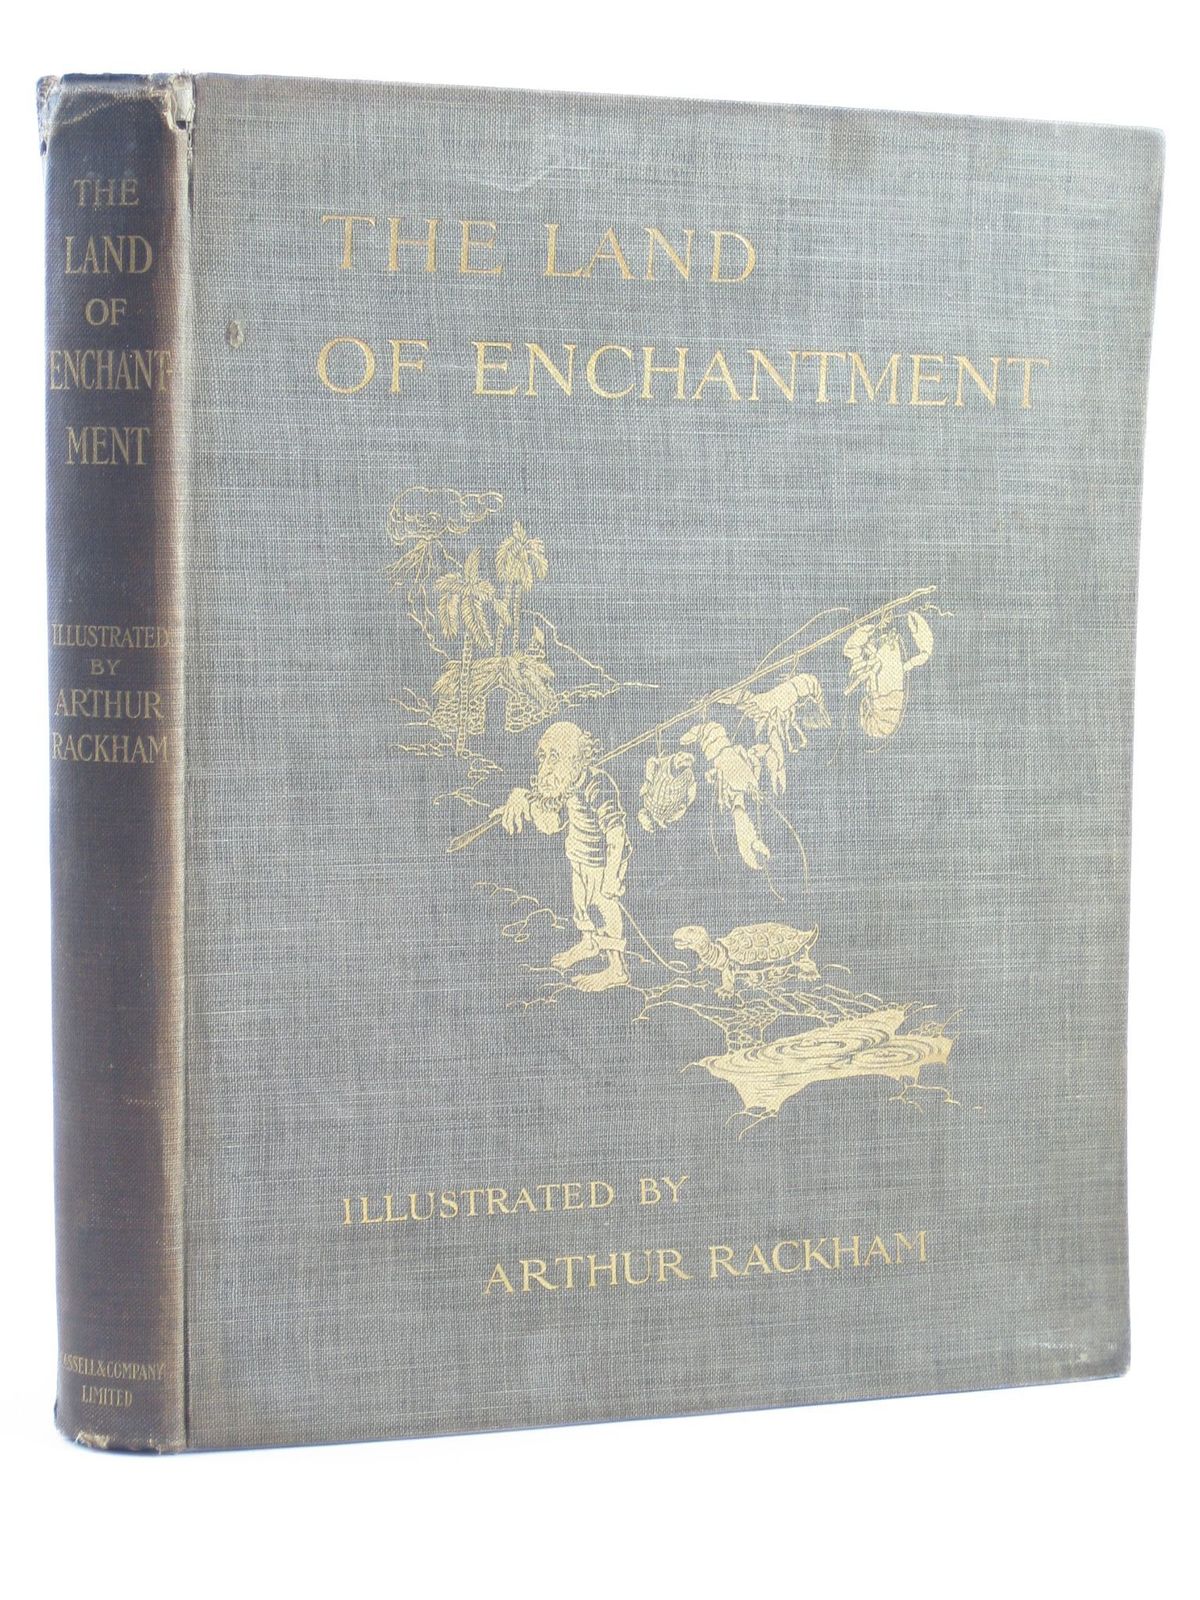 Photo of THE LAND OF ENCHANTMENT written by Bonser, A.E. Woolf, Sidney Bucheim, E.S. illustrated by Rackham, Arthur published by Cassell &amp; Co. Ltd. (STOCK CODE: 1311334)  for sale by Stella & Rose's Books